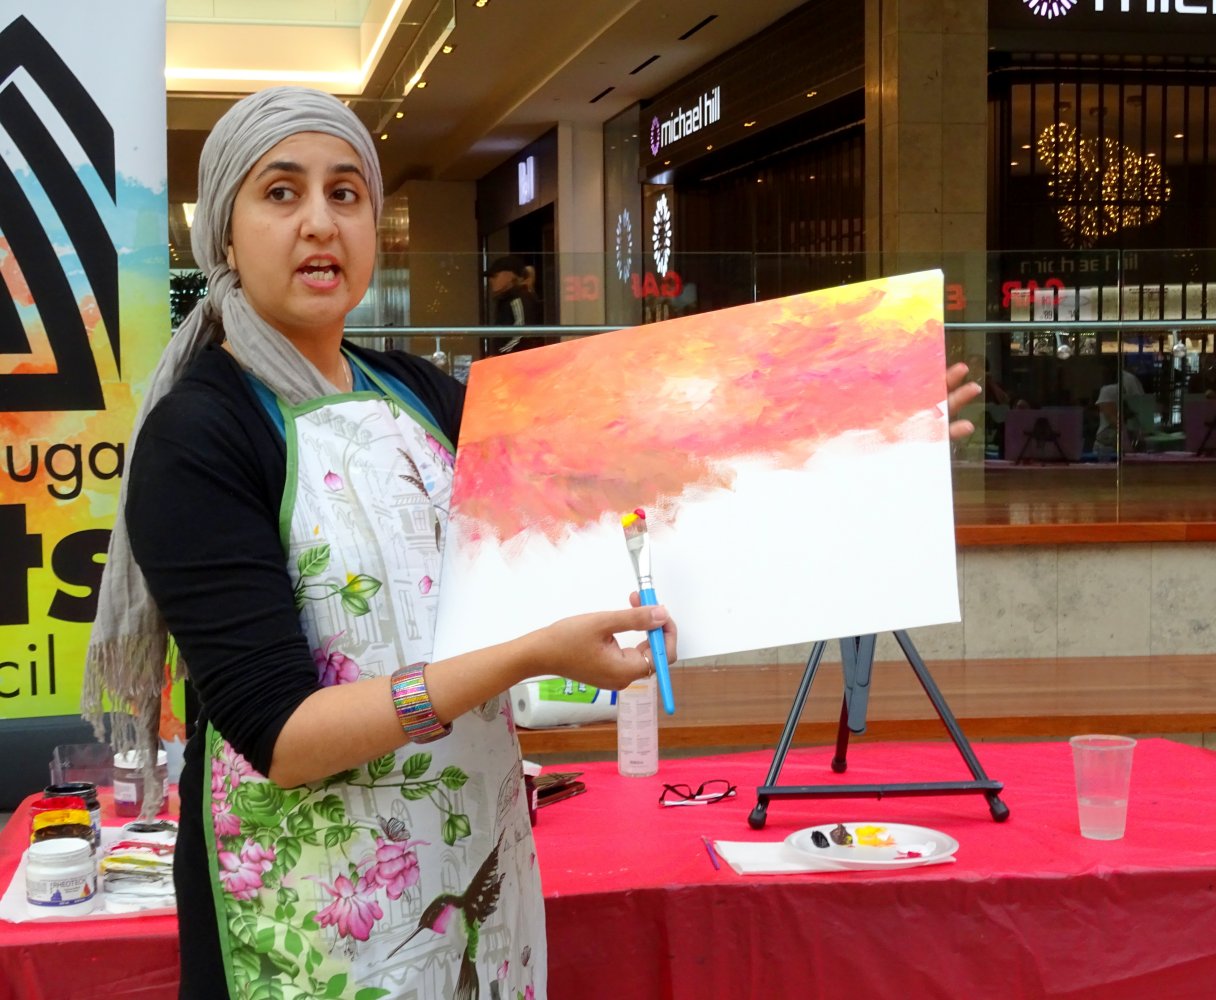 Paint Your Passion Tuesdays by Mississauga Arts Council at Erin Mills Town Centre 11 October 2016